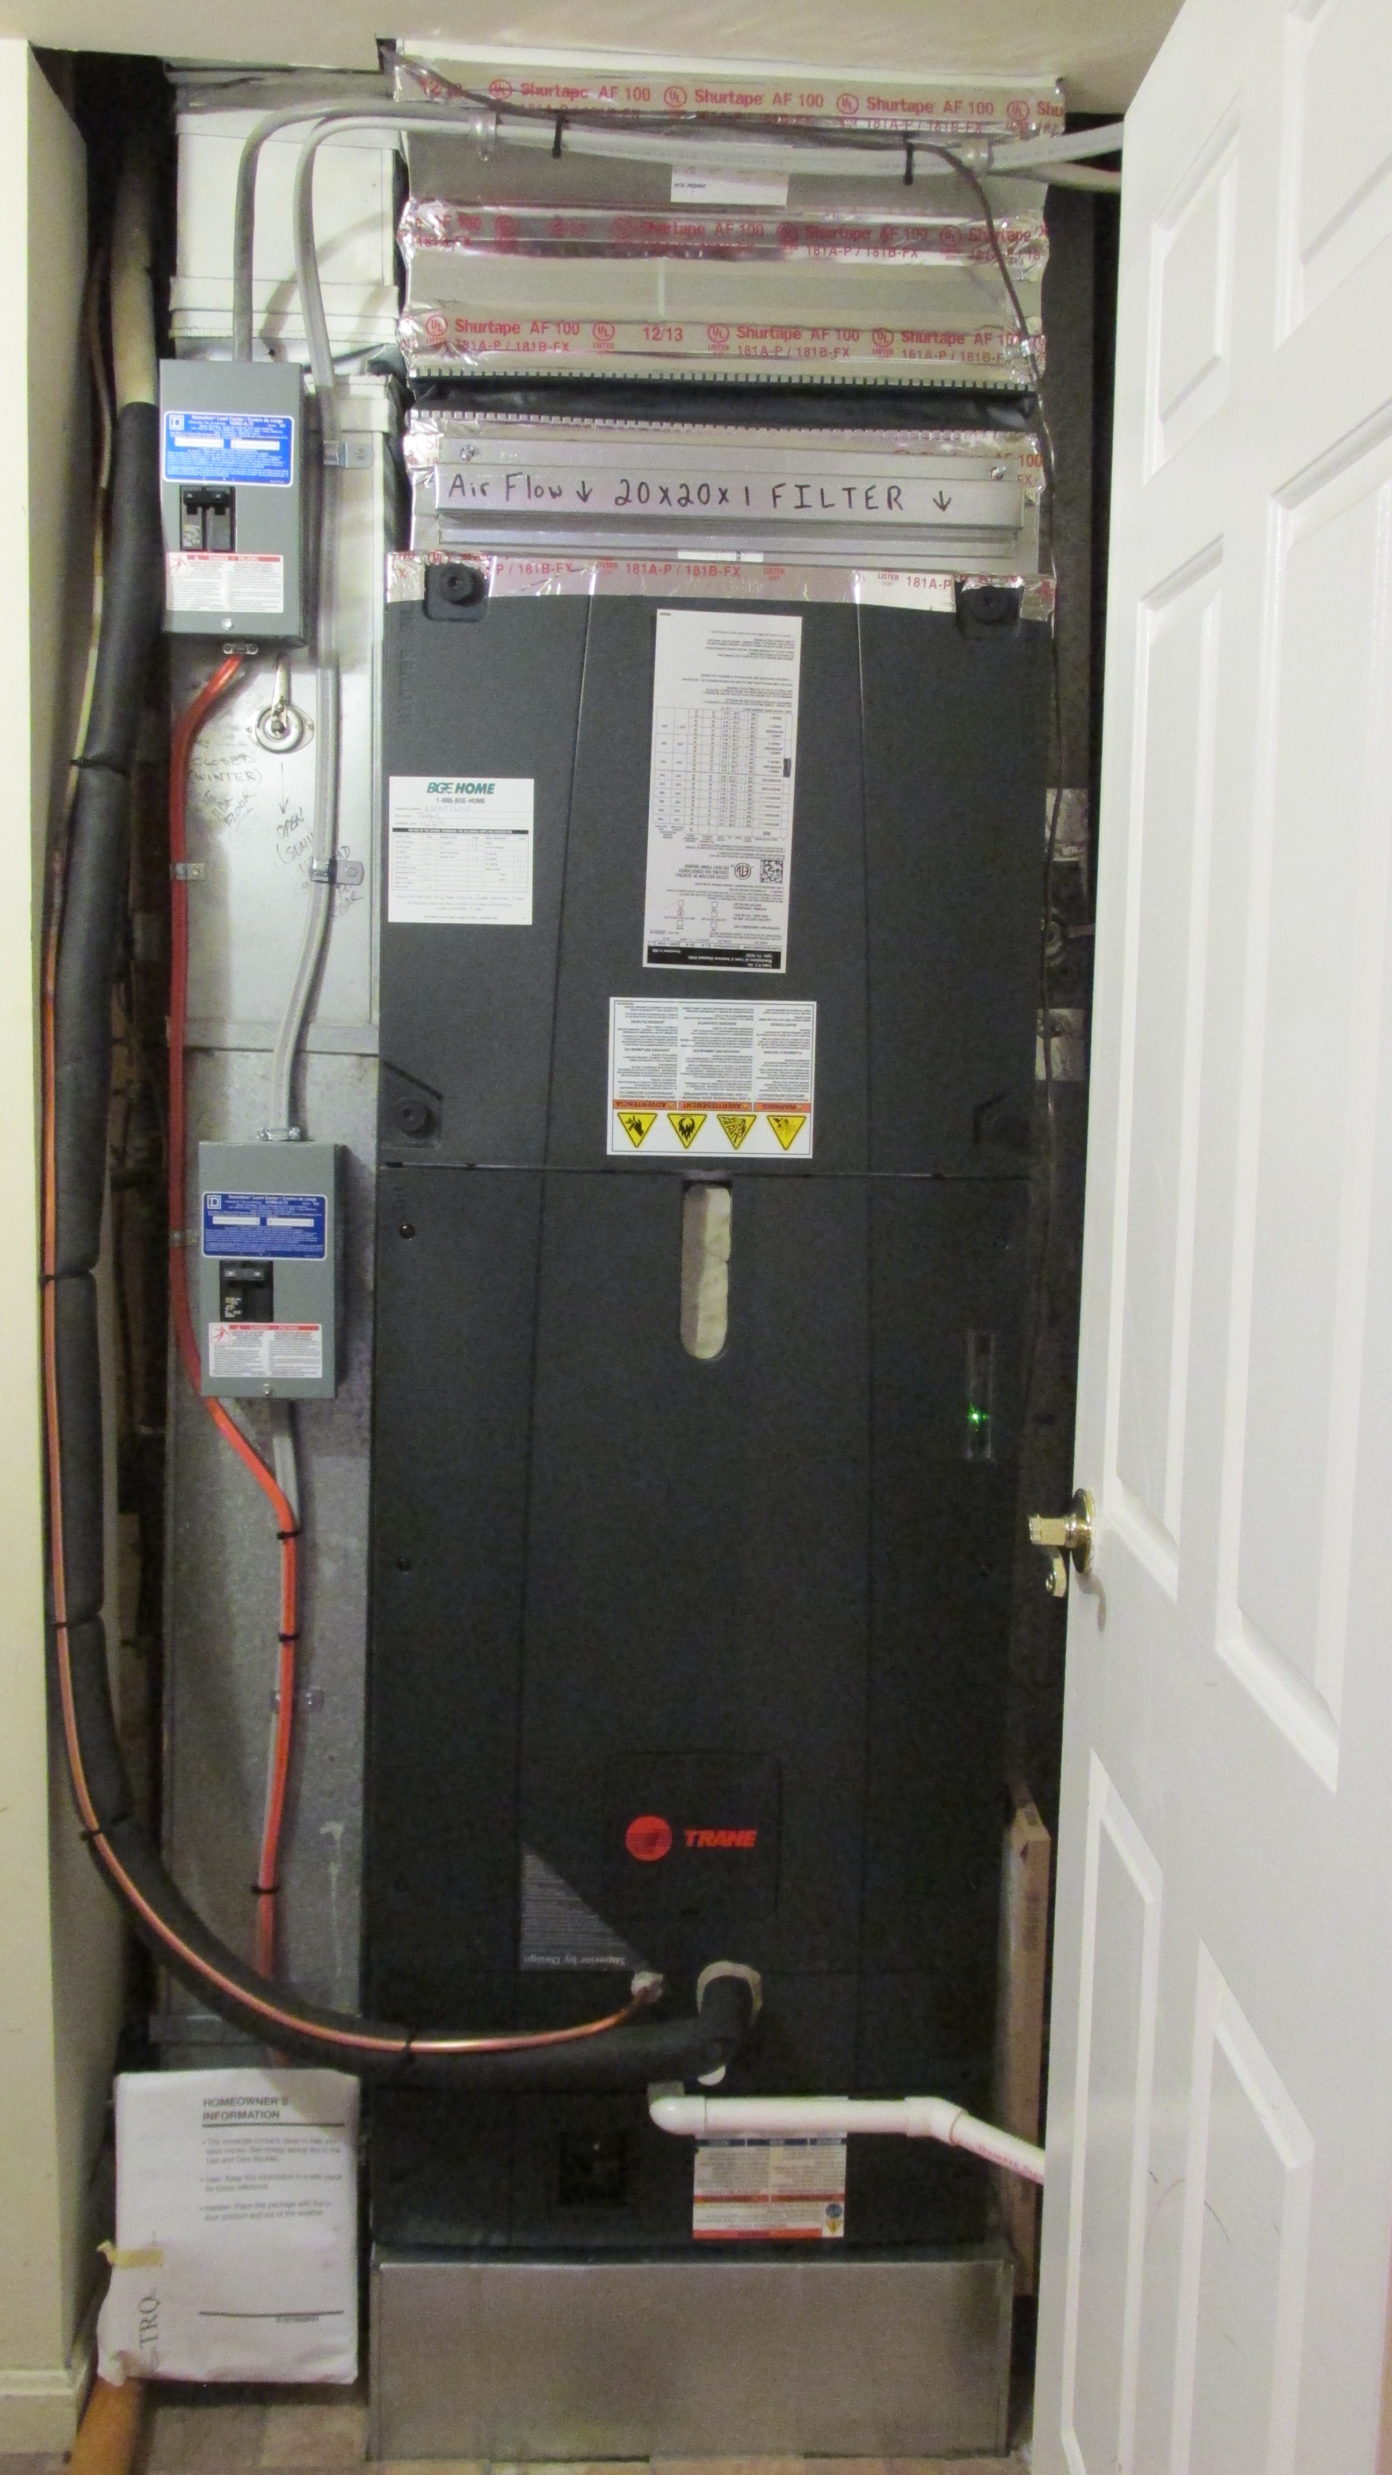 Save a Repair Bill this Fall With This 13 Step Furnace Maintenance Guide!